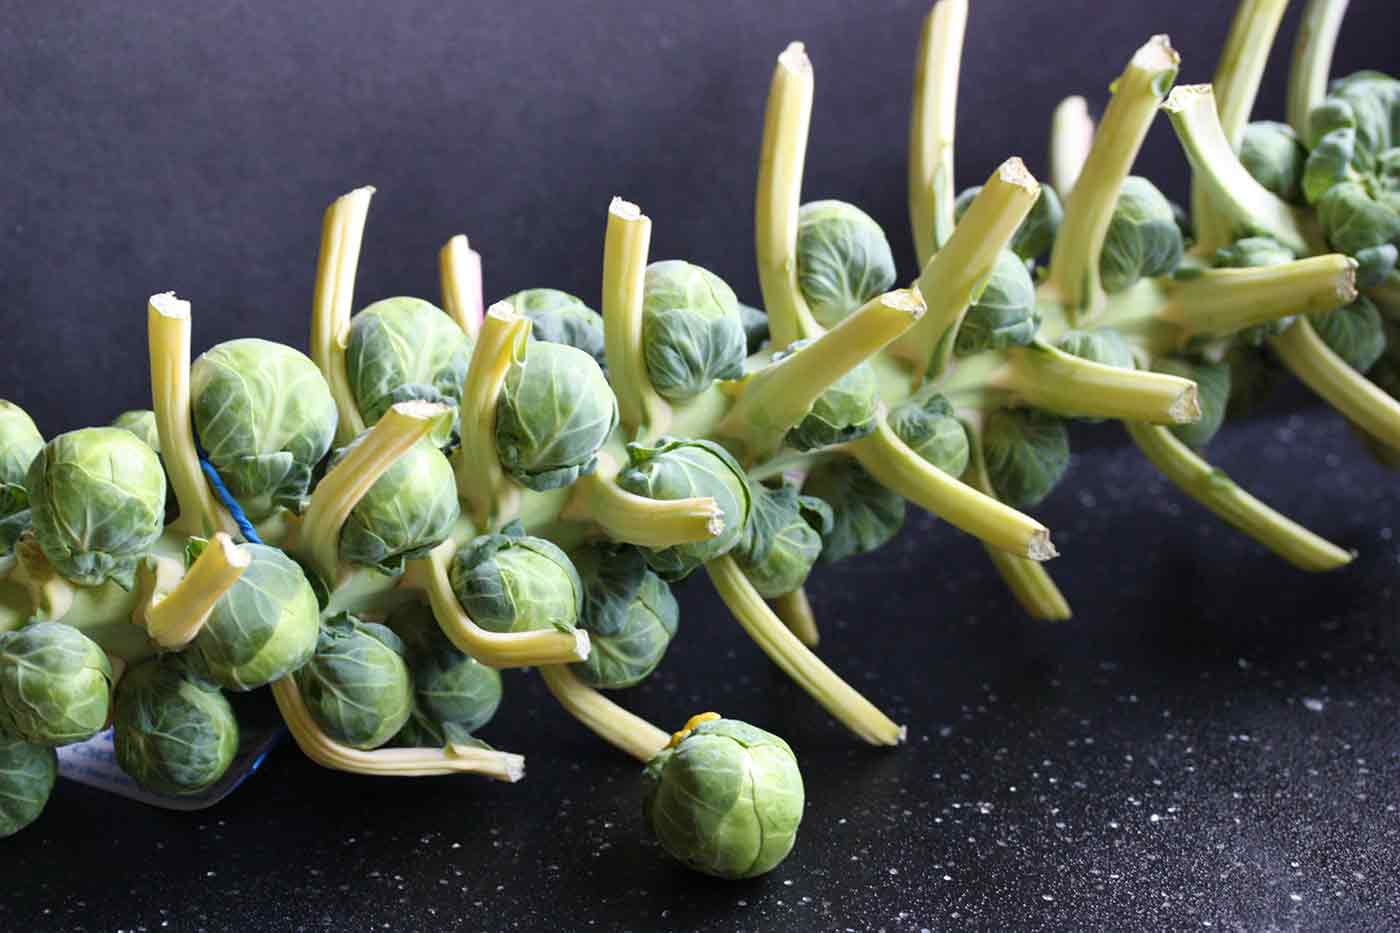 Brussels sprout stalk.